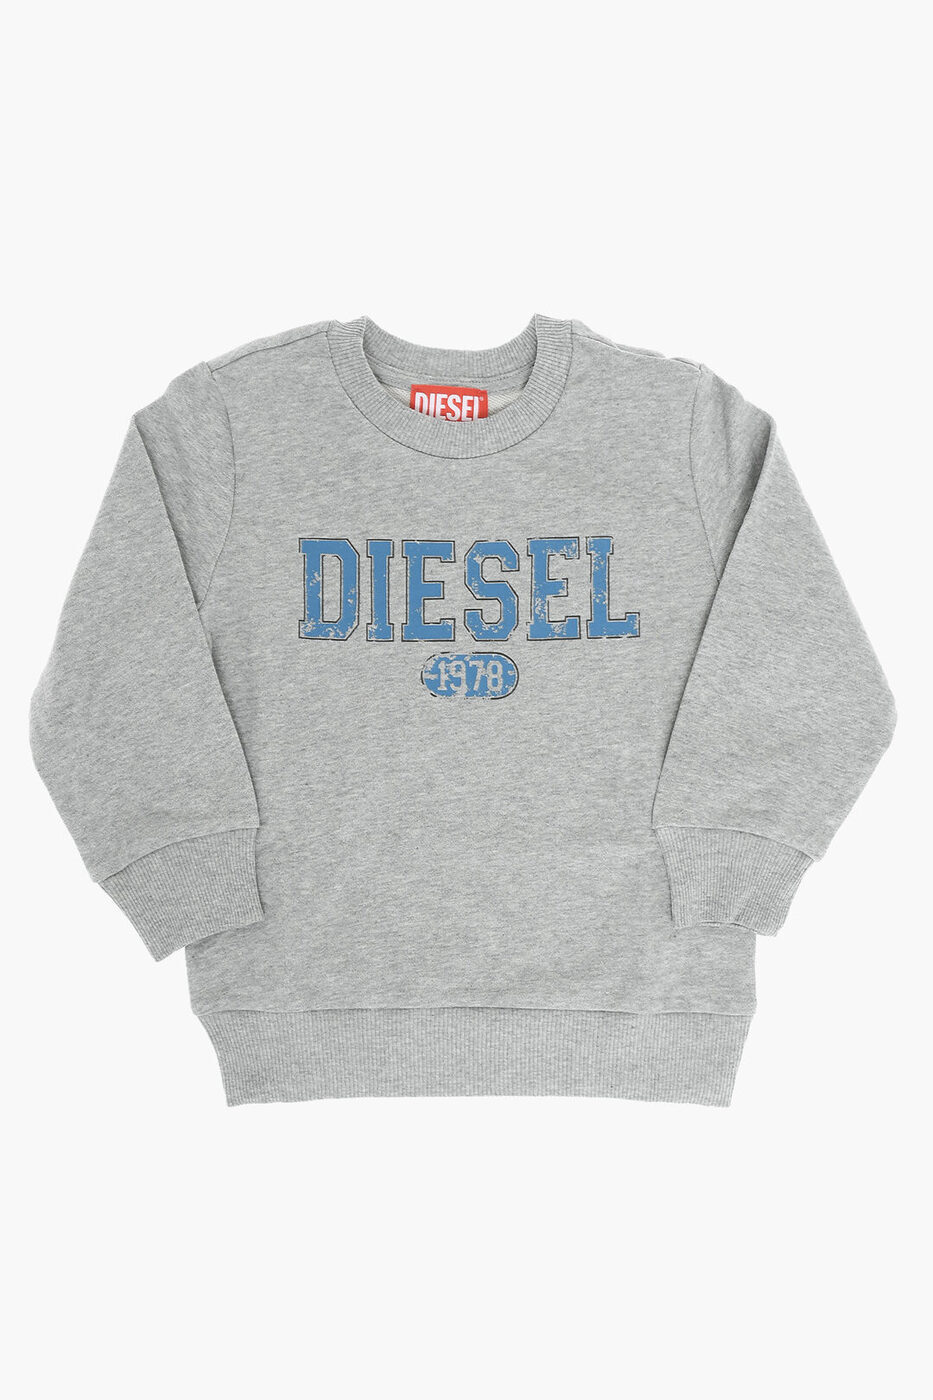 DIESEL ディーゼル スウェット J01865 KYAXI K963 ボーイズ RED TAG BRUSHED COTTON SLEO CREW-NECK SW..